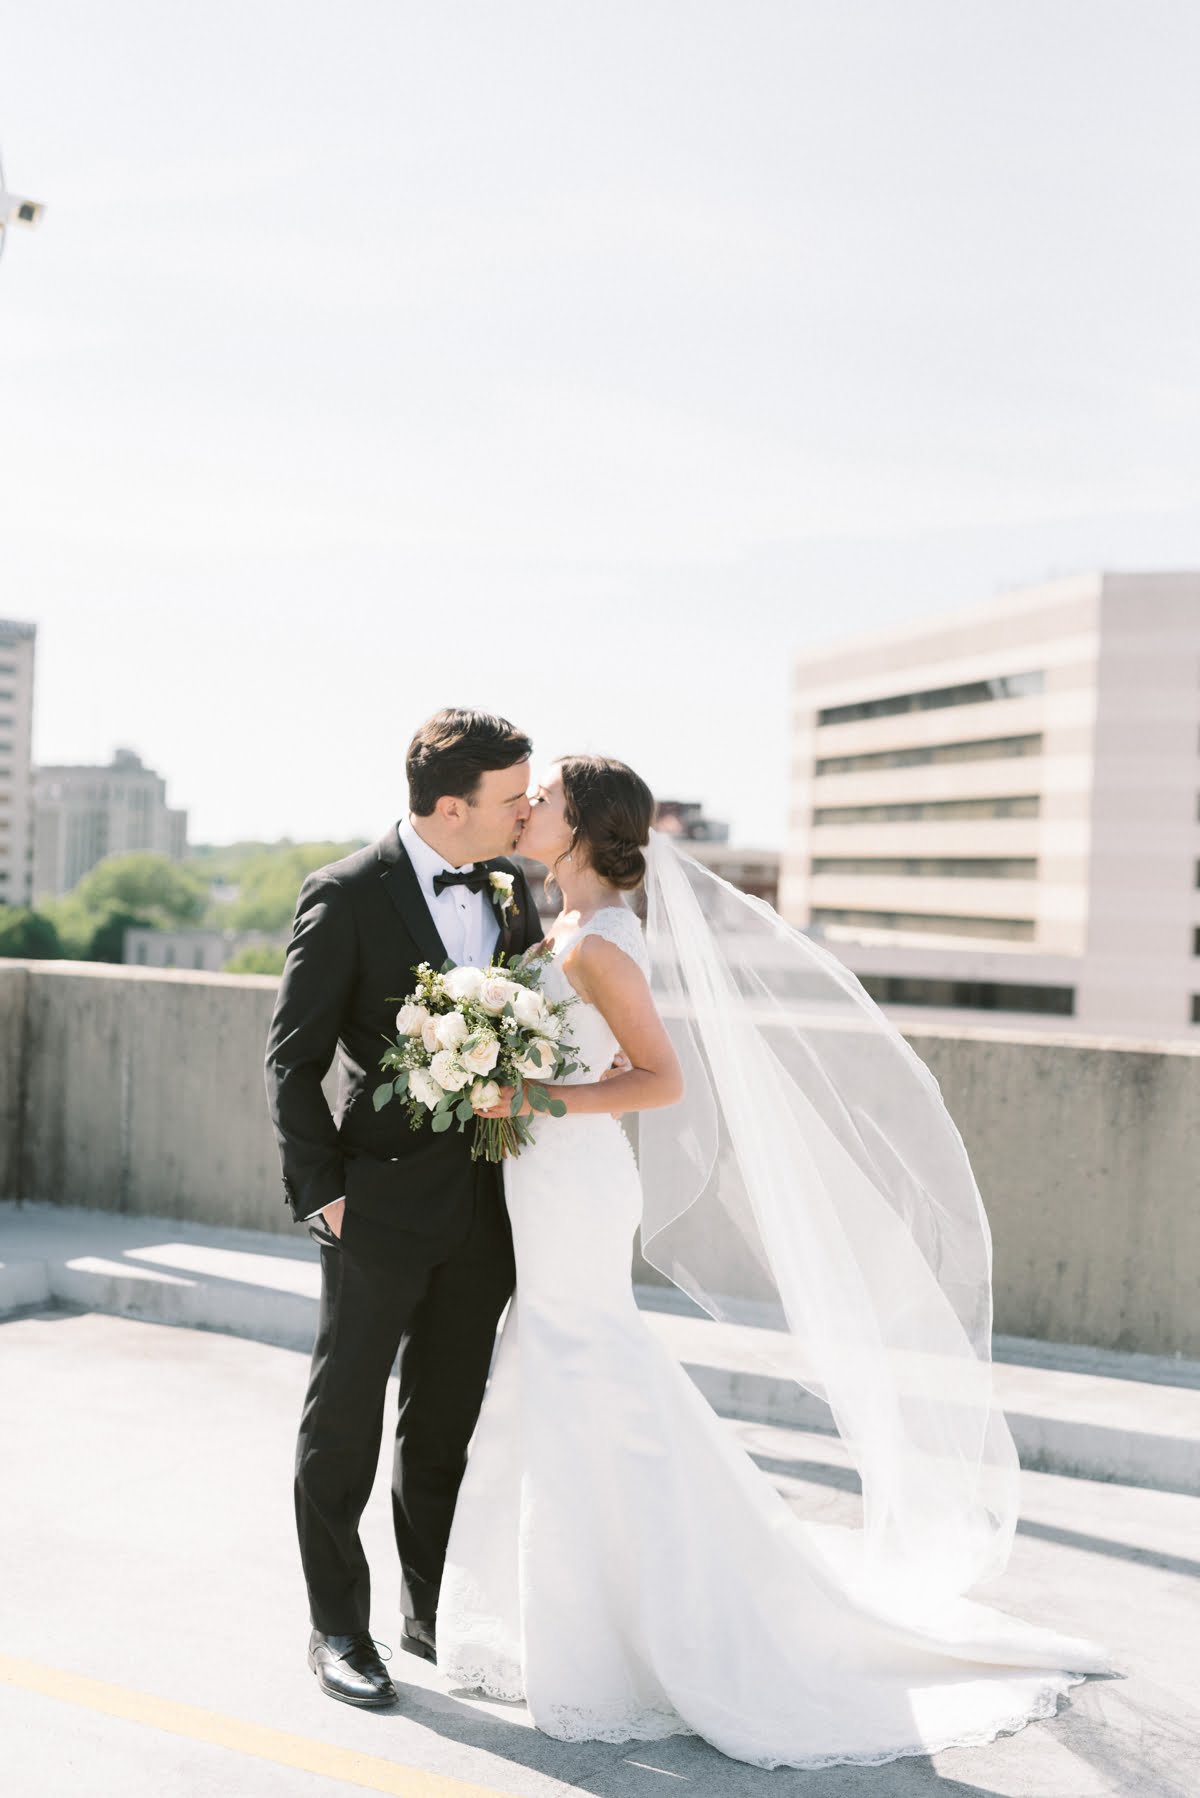 April Wedding at Cathedral of St Paul in Birmingham Alabama